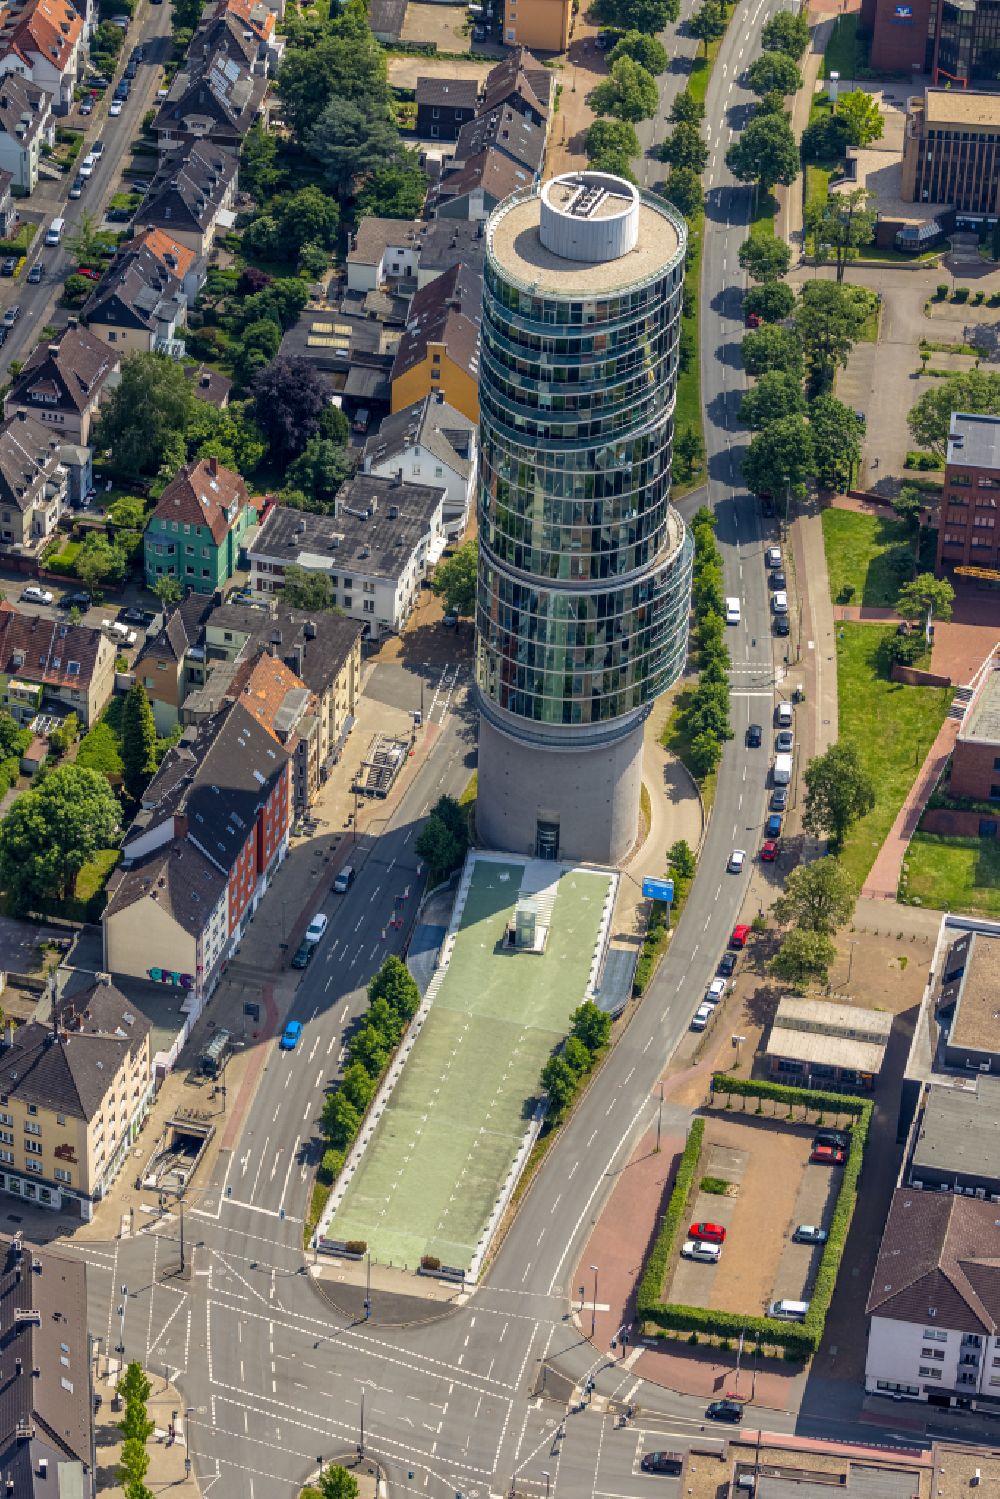 Bochum from above - Skyscraper Exenterhouse - Exenterhaus on a former bunker at the University Street in Bochum, North Rhine-Westphalia, Germany